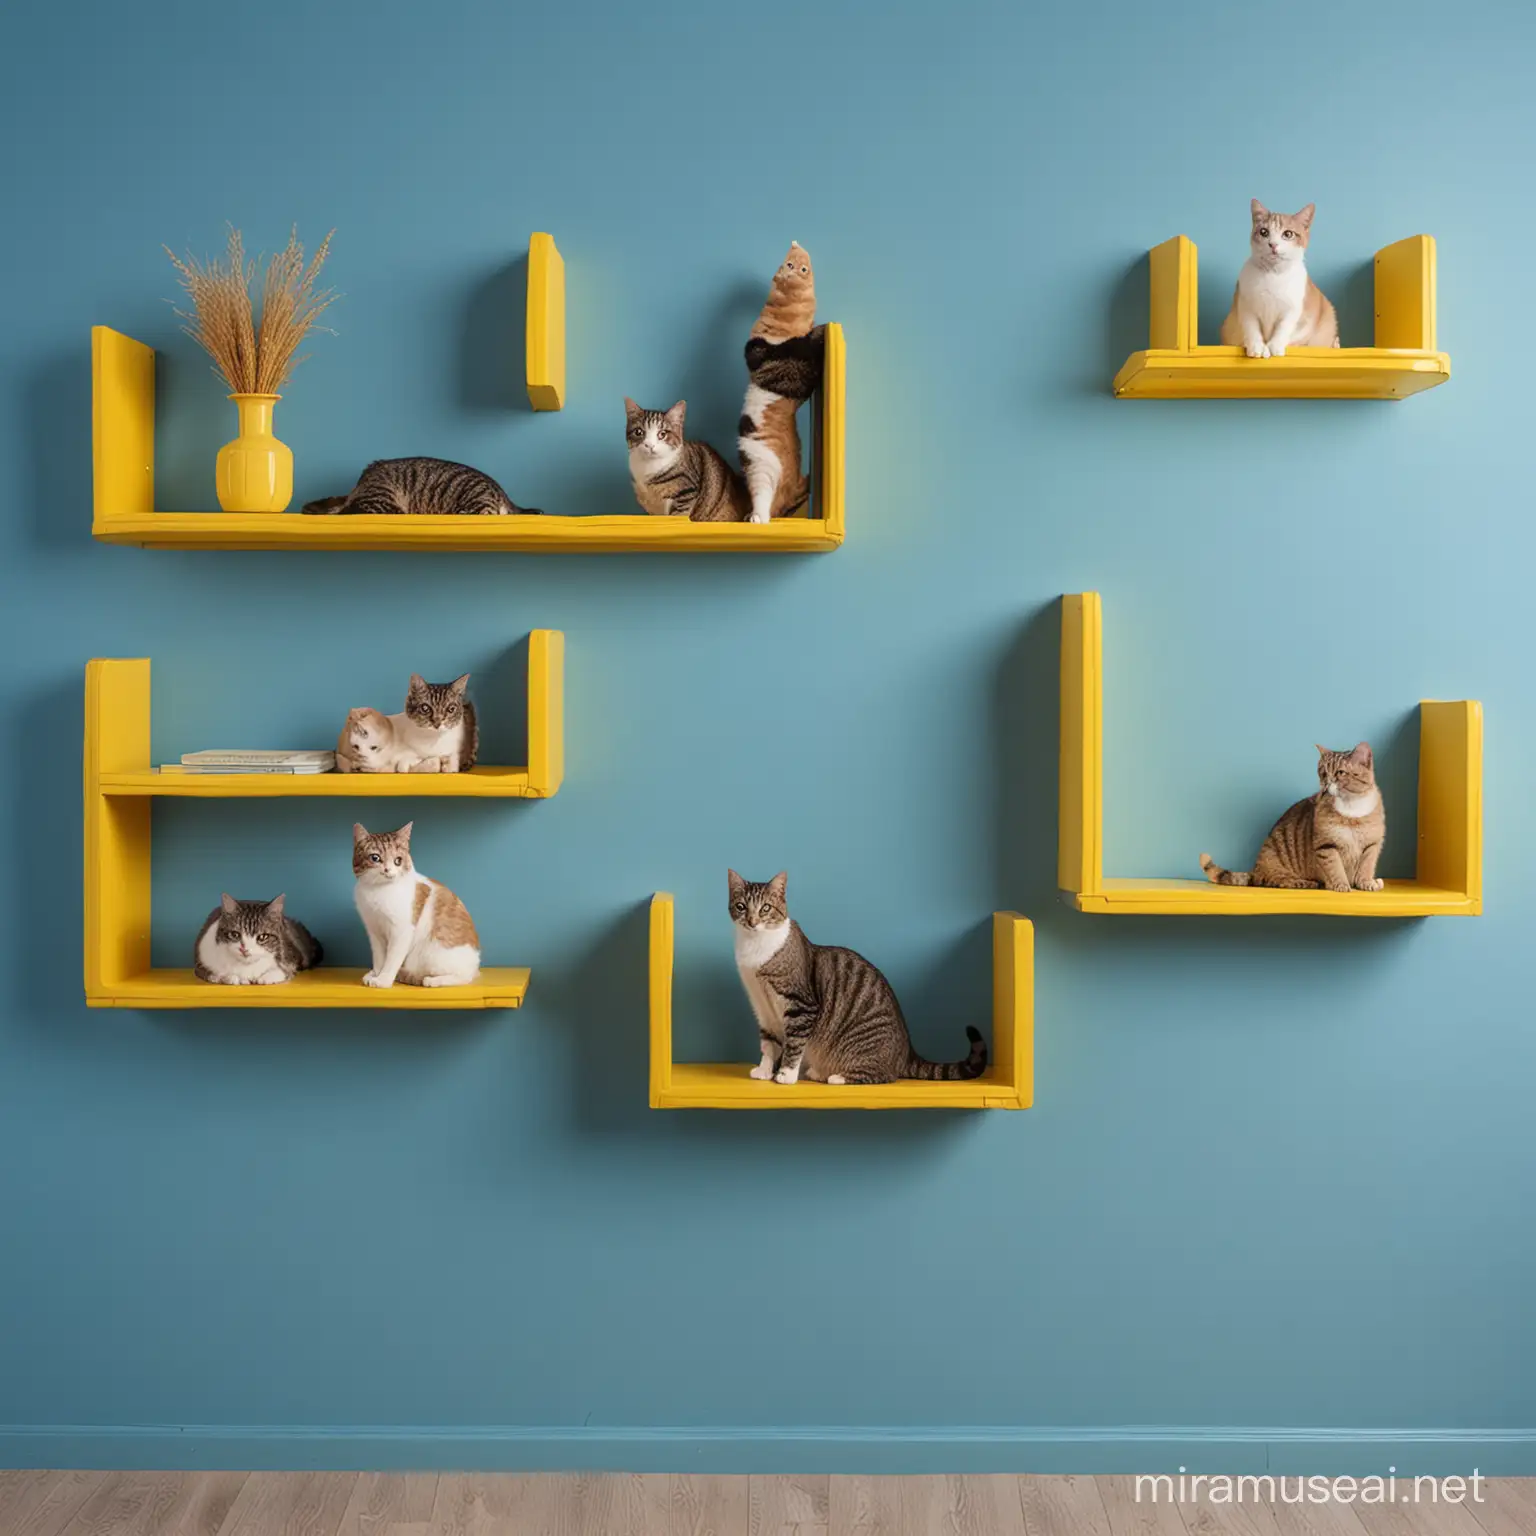 Three Cats Perched on Sunny Yellow Shelves Against a Vivid Blue Wall